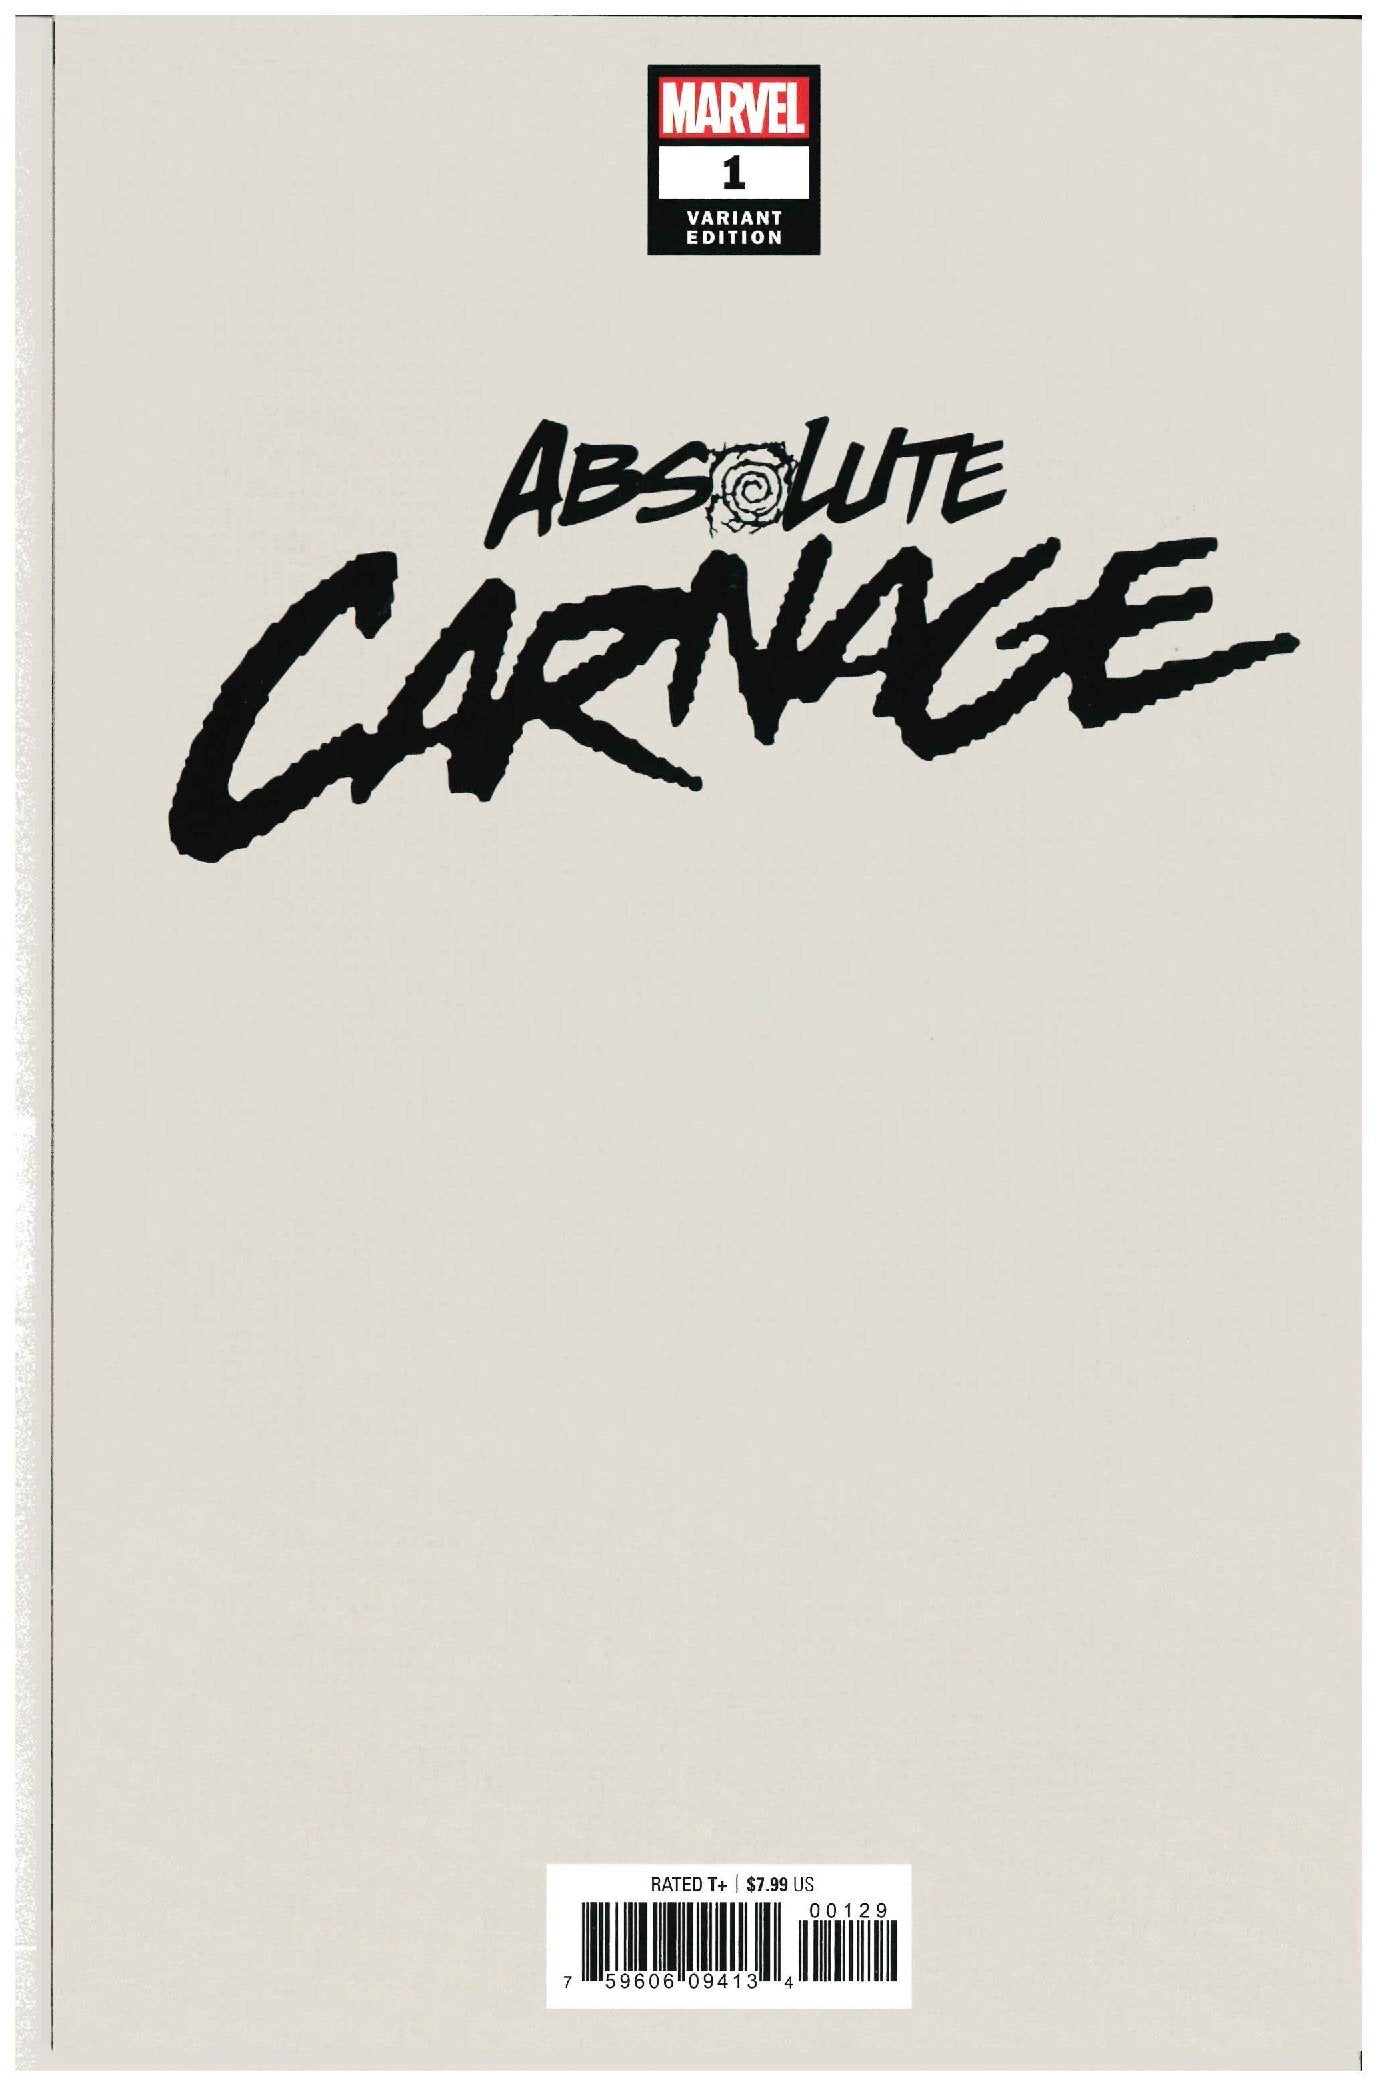 Absolute Carnage #1 backside